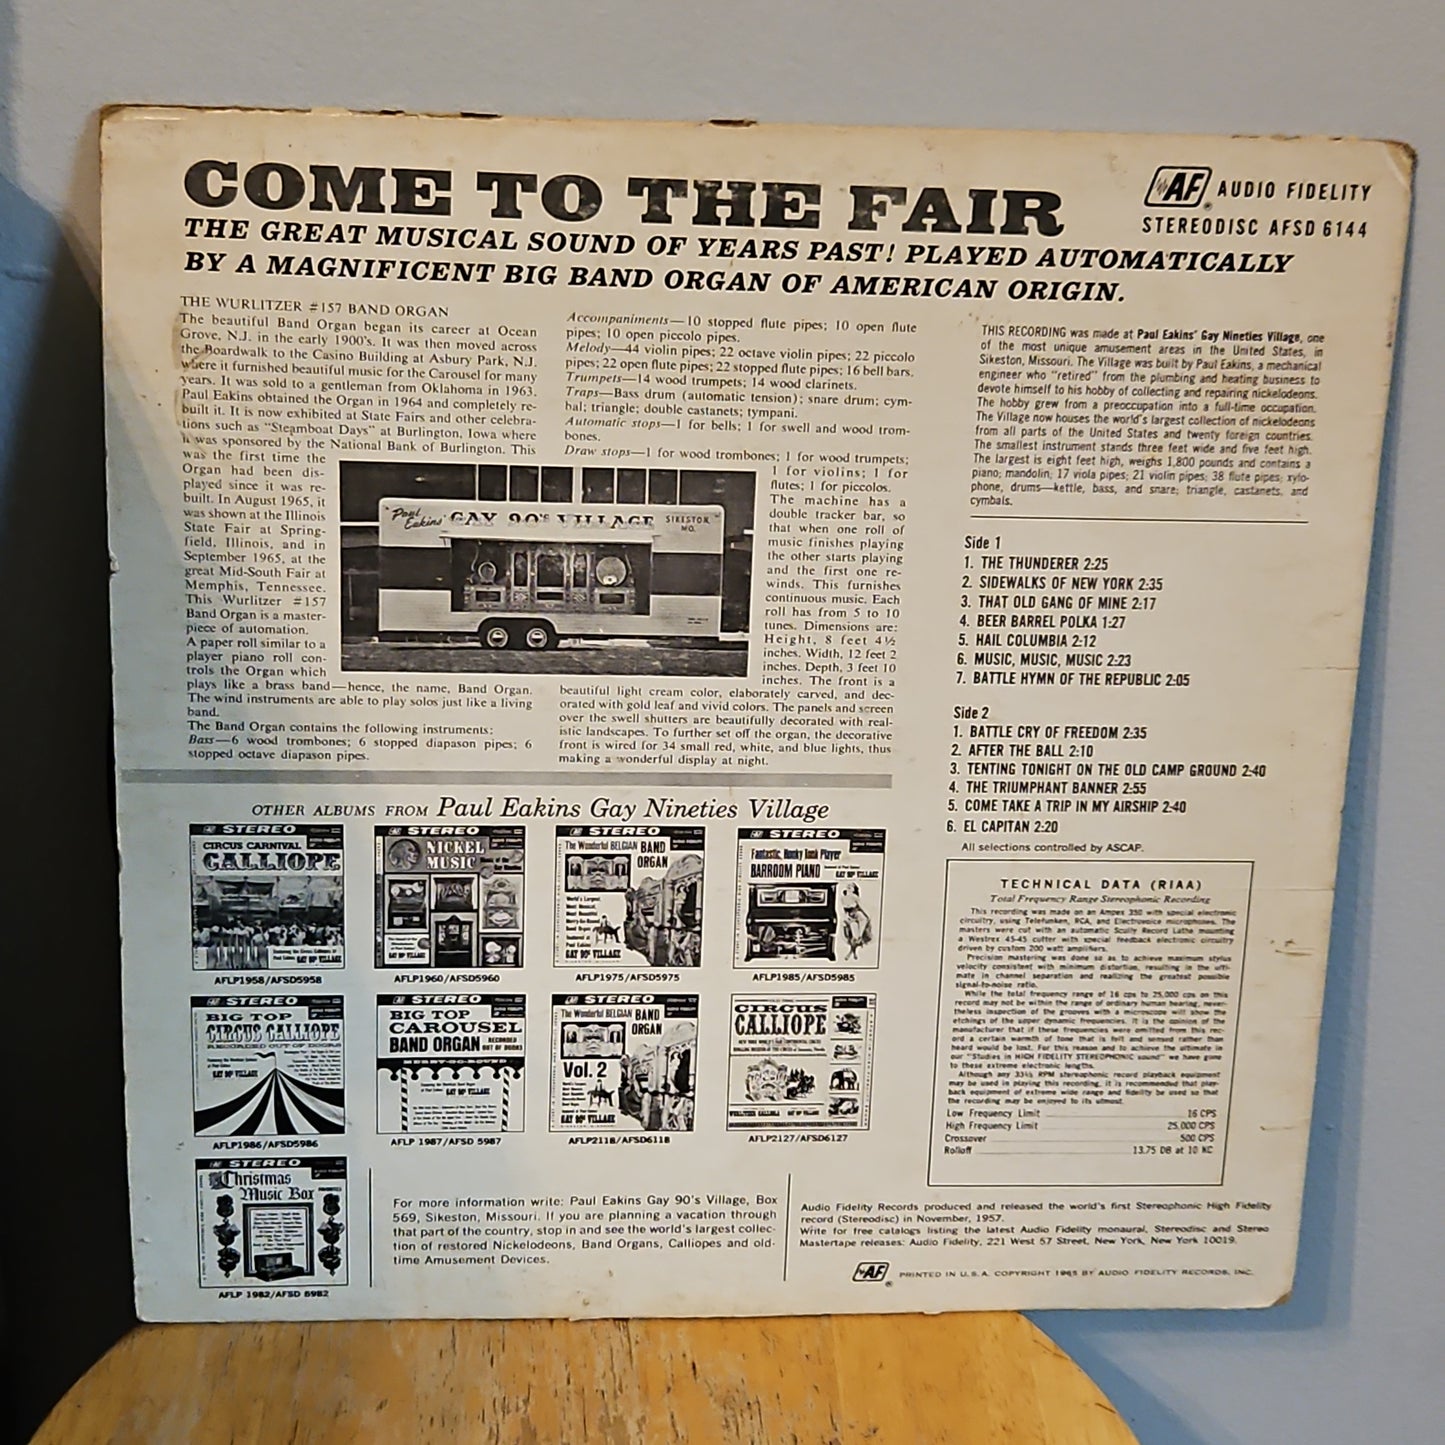 Paul Eakins' Big Band Organ Come to the Fair By Audio Fidelity Records